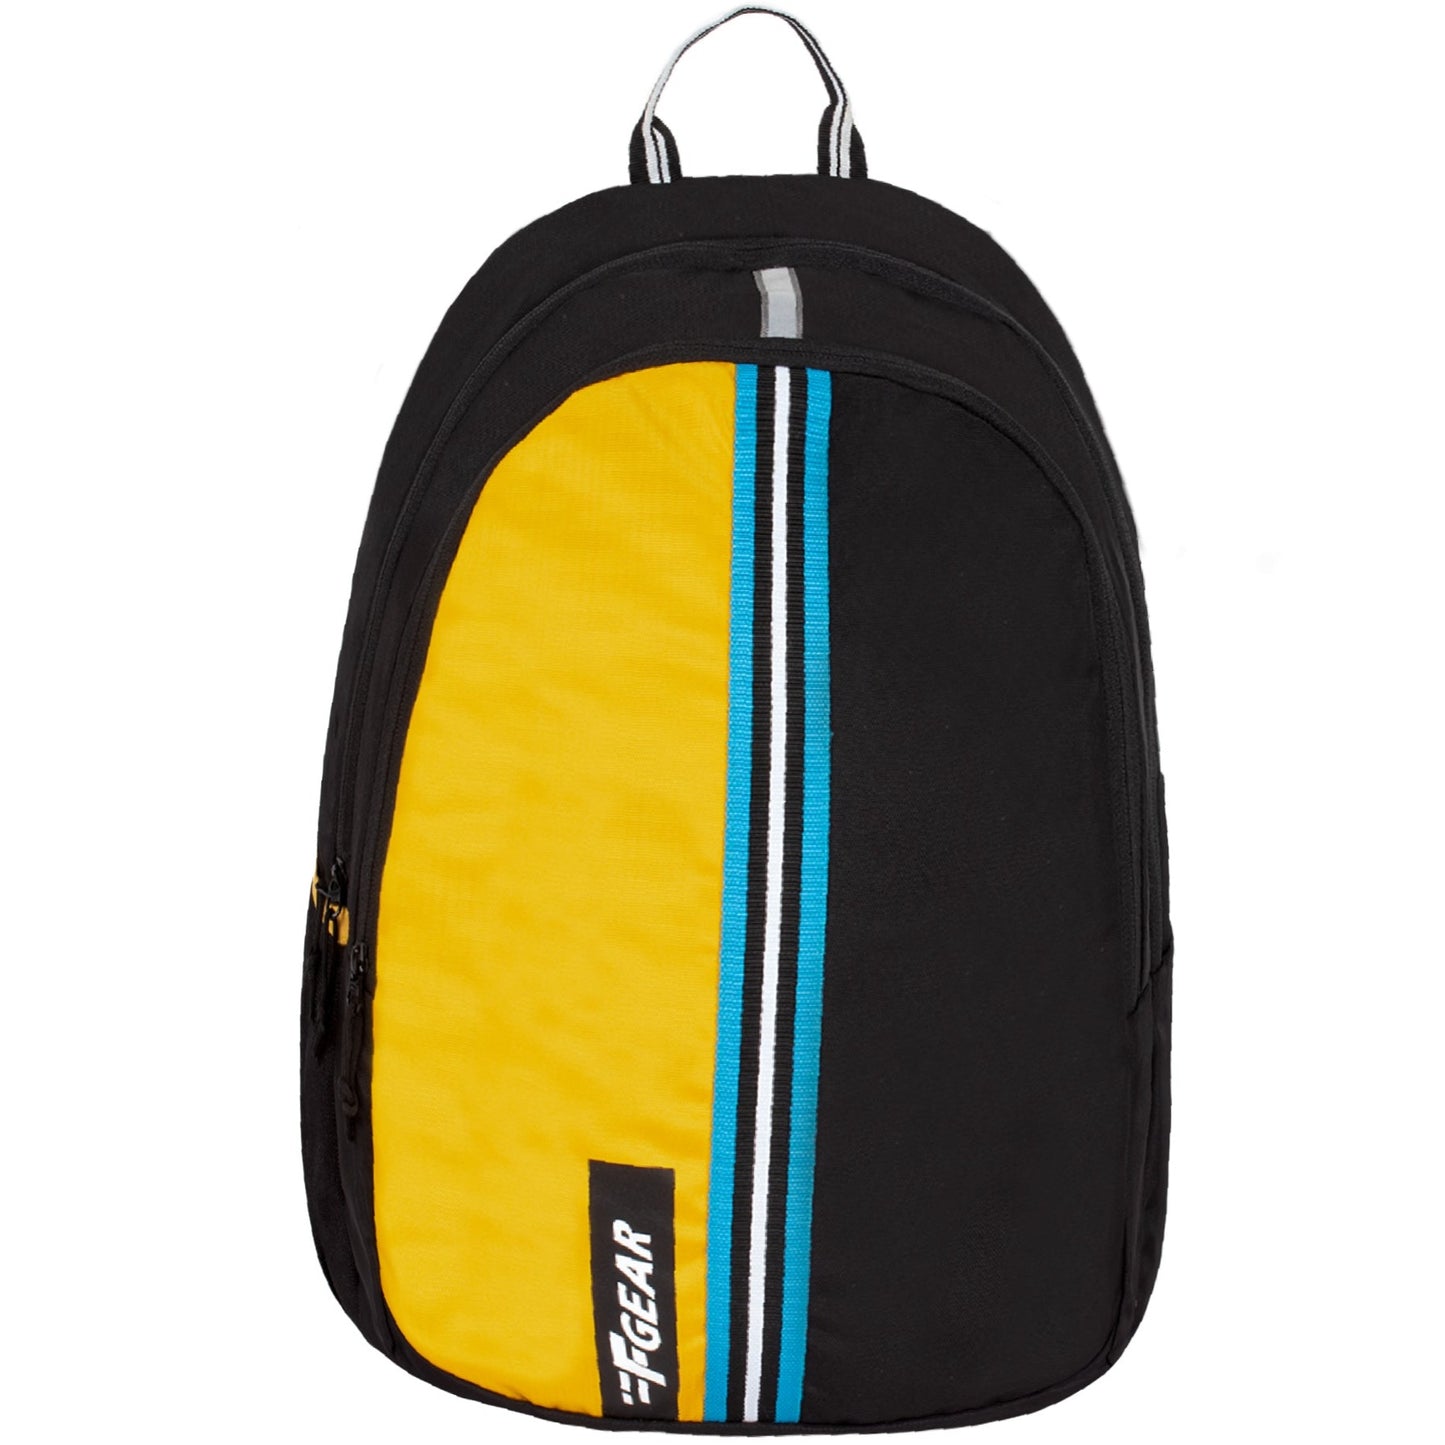 Salient 27L Guc Black Yellow Backpack